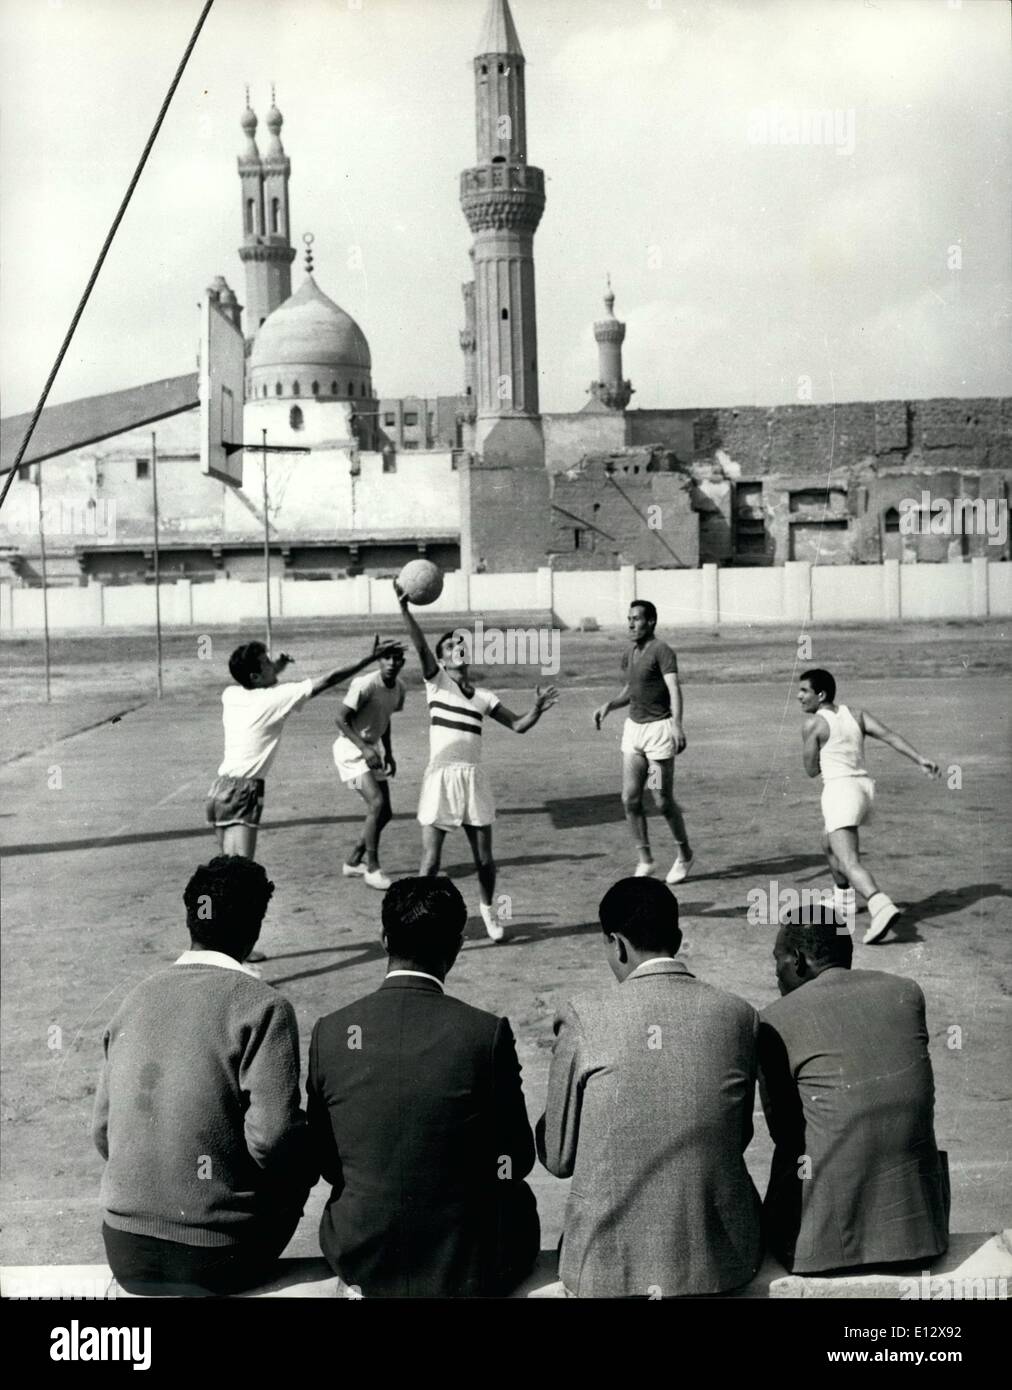 Feb. 25, 2012 - Students at Al-Azher University, Cairo receive an extensive physical education covering gymnastics, wrestling, basket ball, volley ball and tennis. Stock Photo